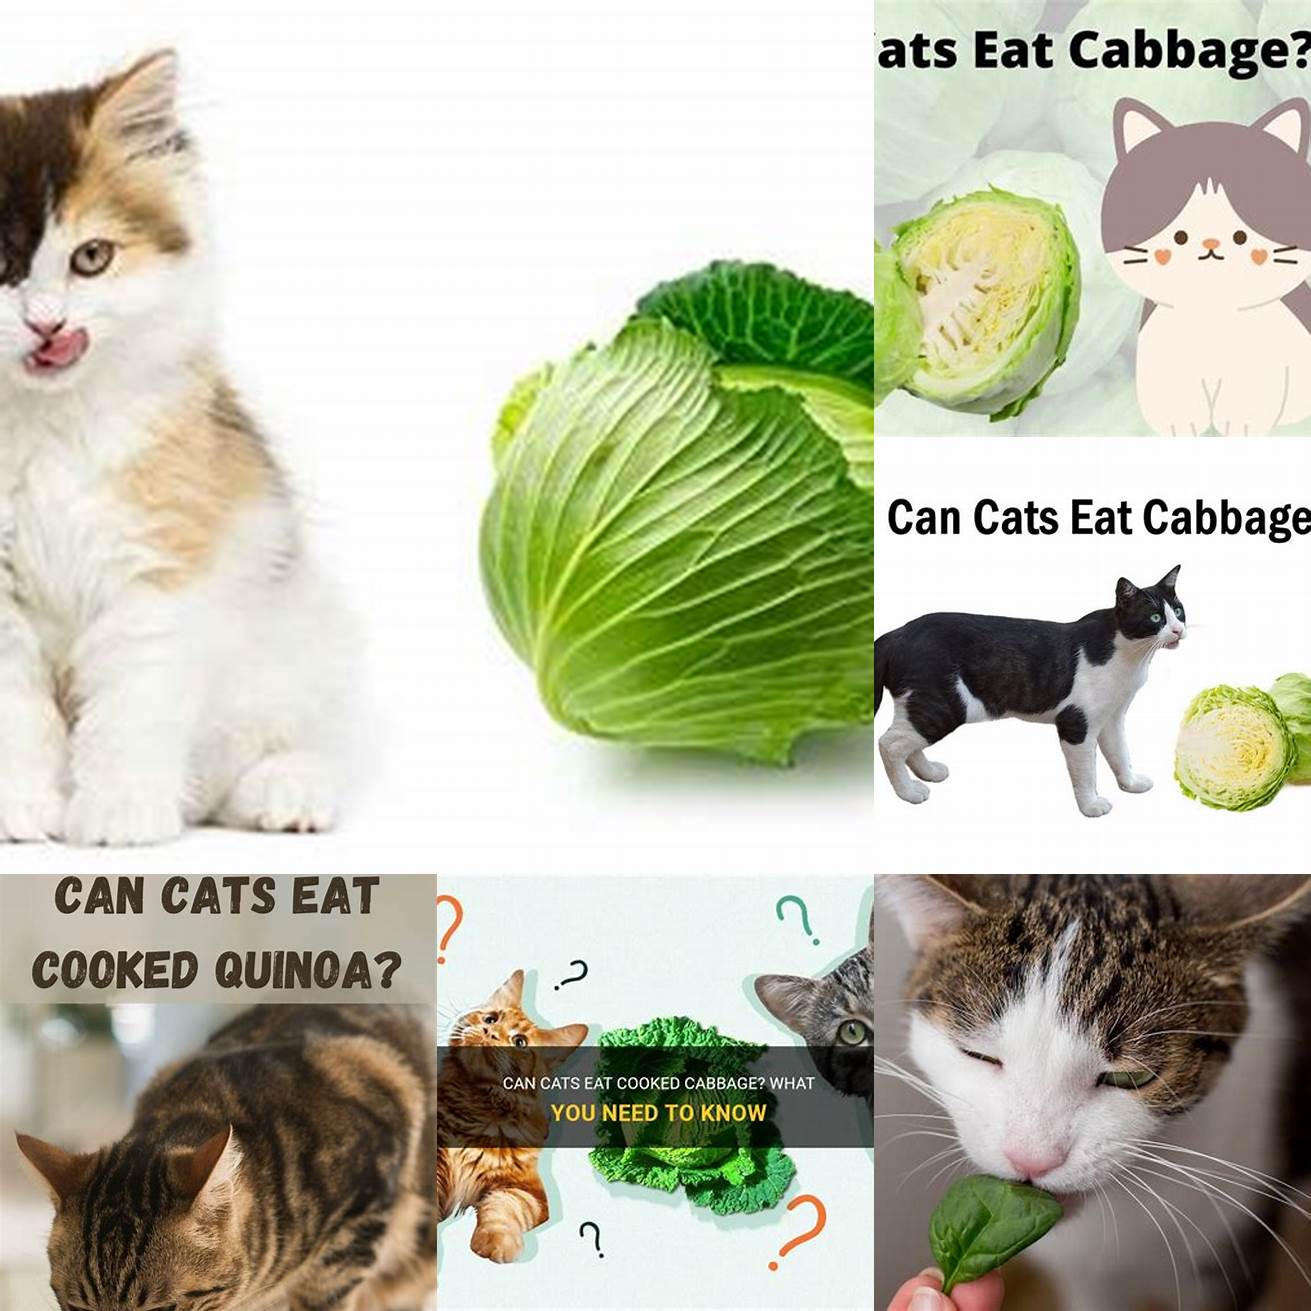 Q Can cats eat cooked cabbage A Yes cats can eat cooked cabbage as long as its not seasoned with any ingredients that are toxic to cats such as garlic or onion